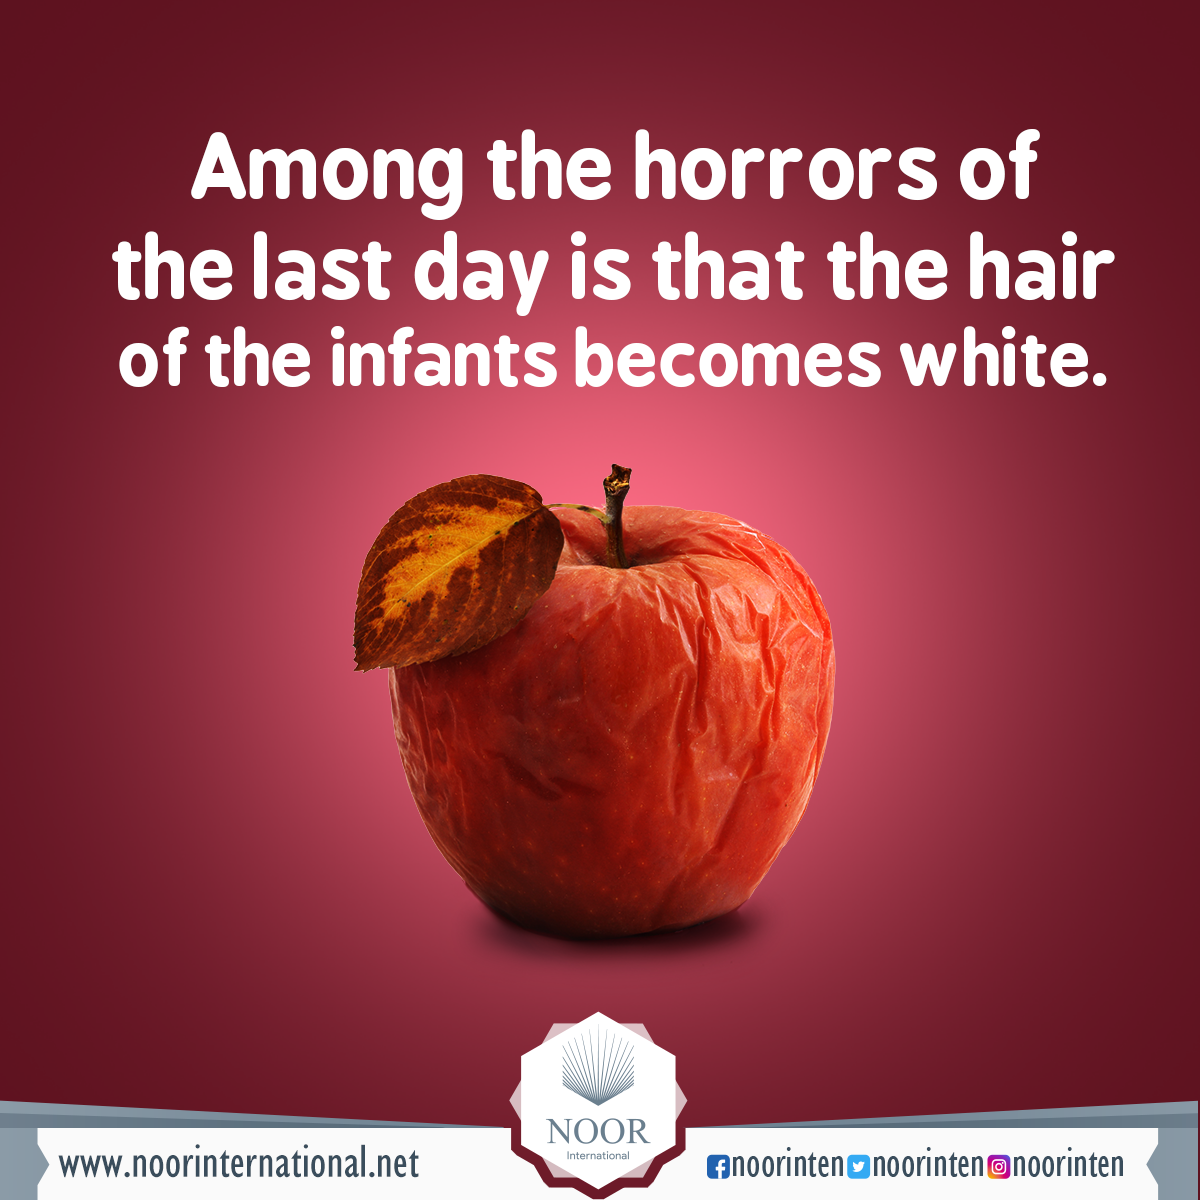 Among the horrors of the last day is that the hair of the infants becomes white.